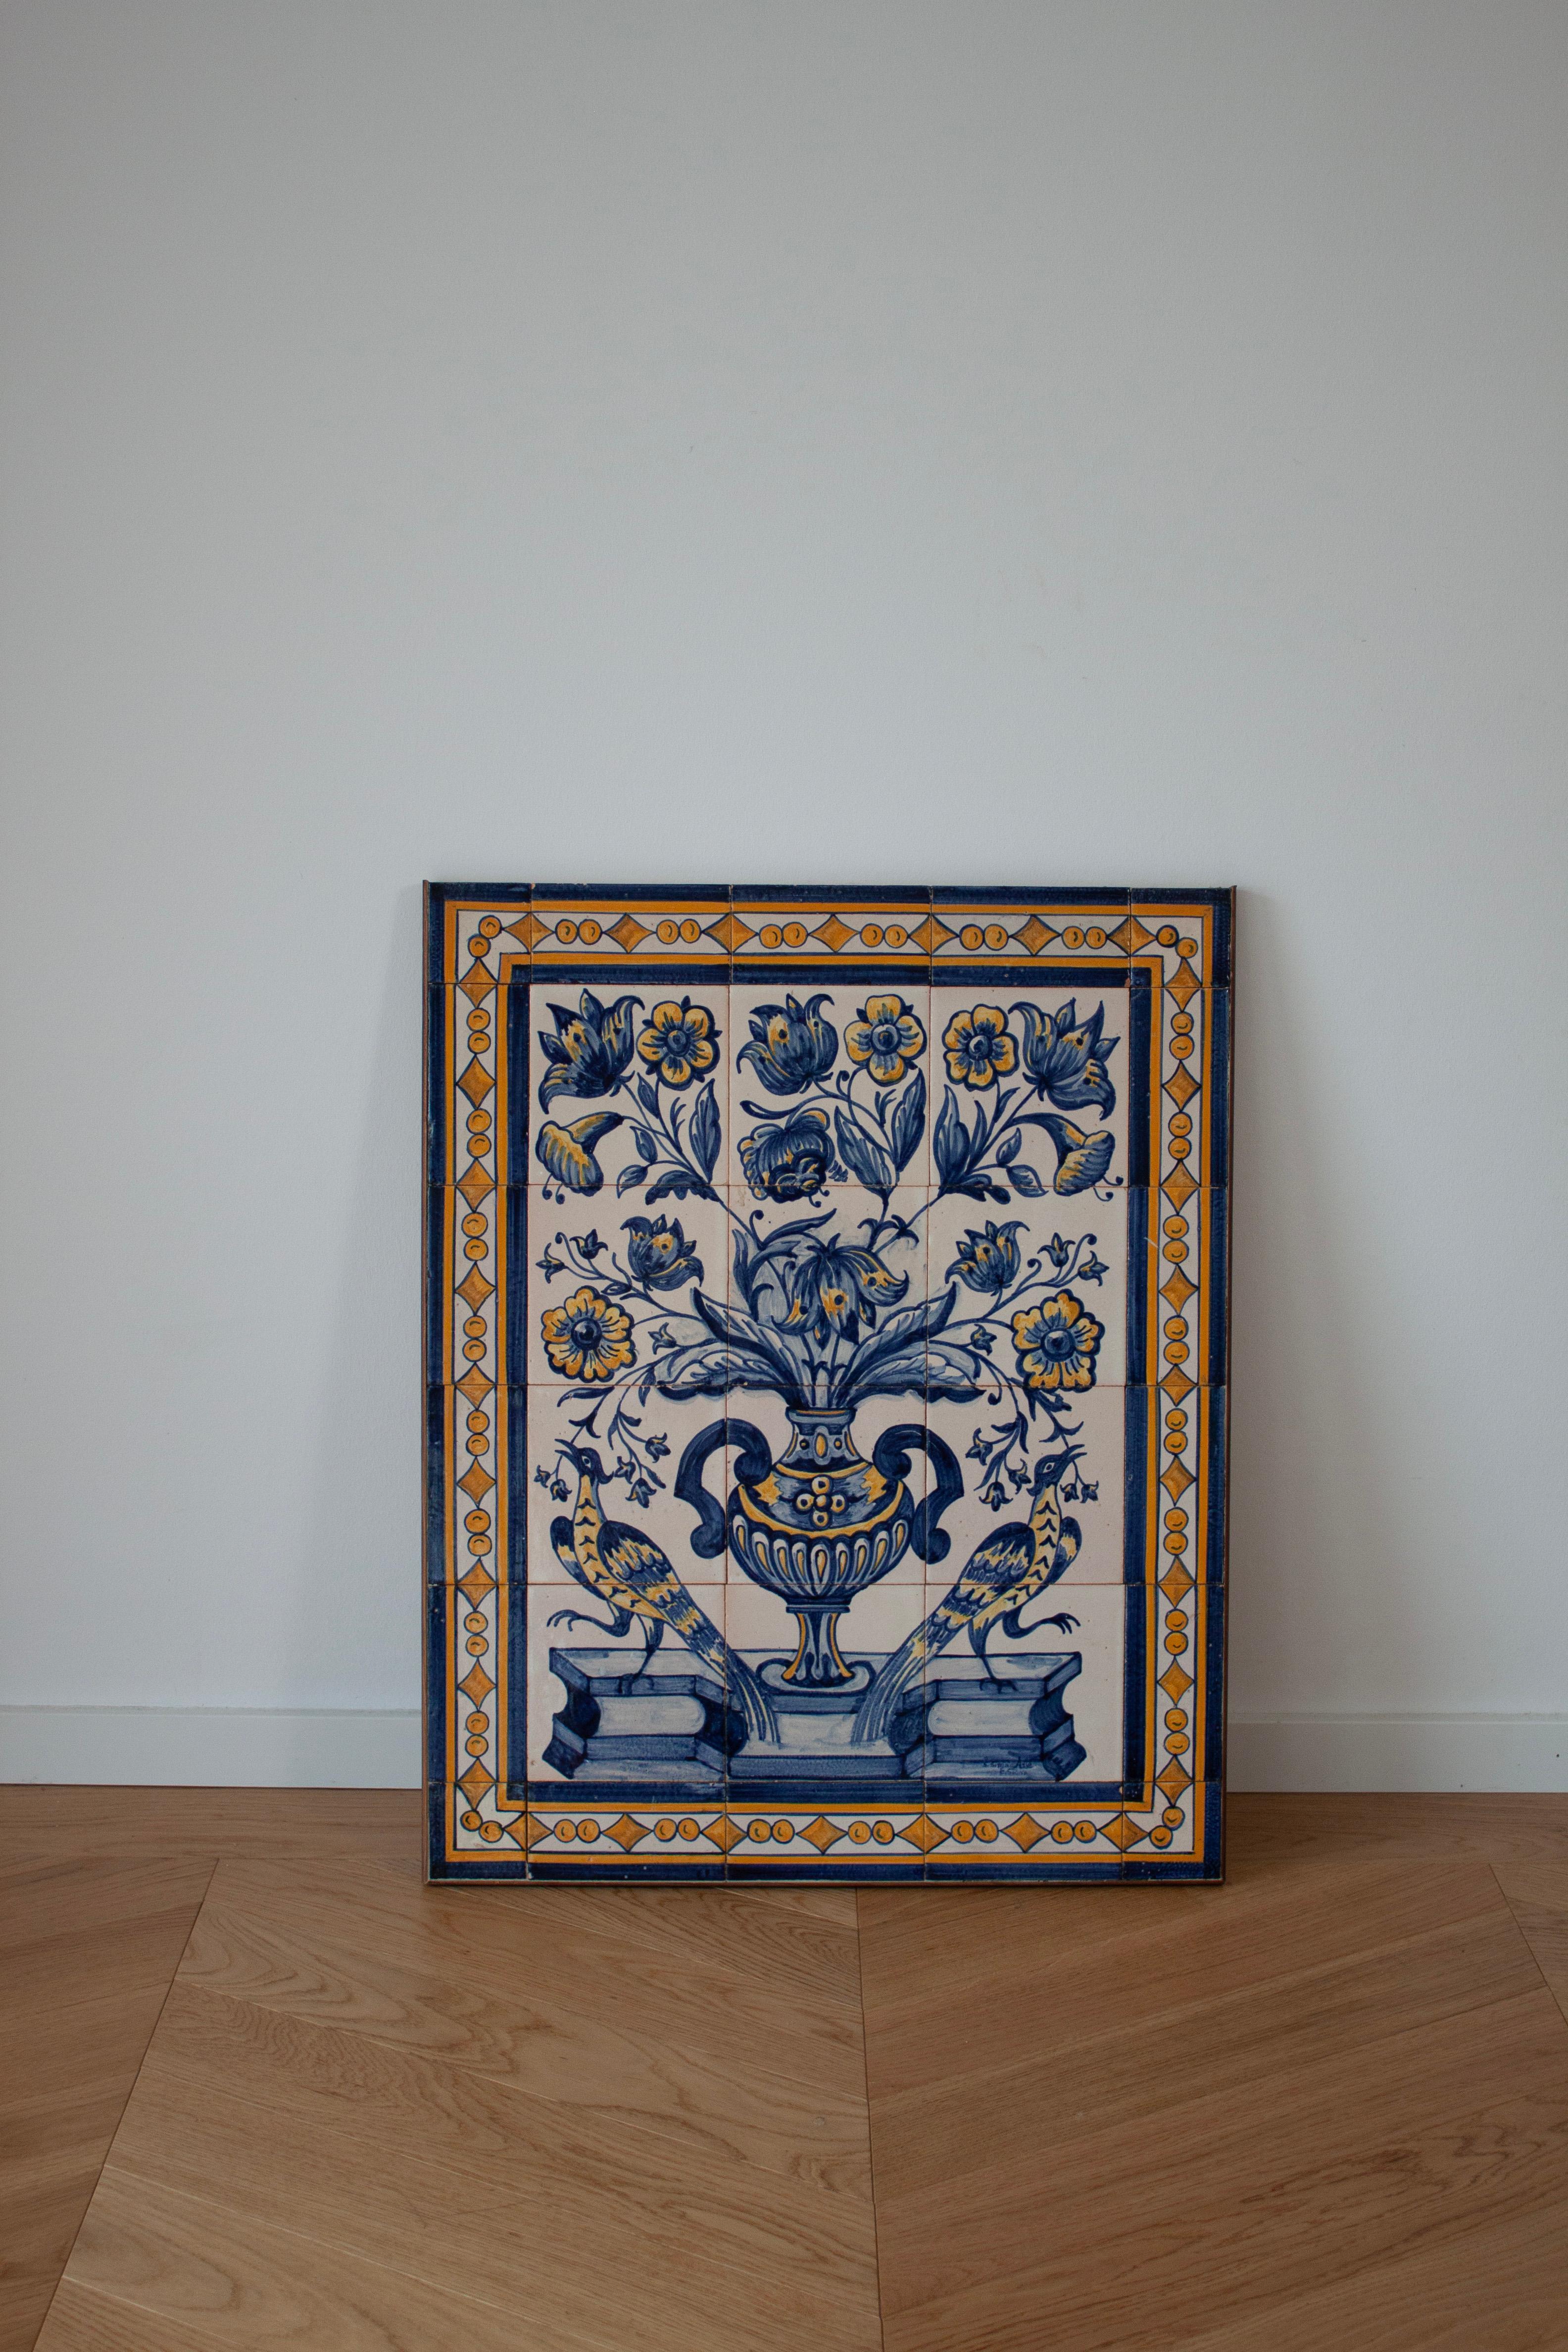 On offer is a beautiful piece of tiled artwork, showcasing intricate floral and animal motifs, painted in a blend of blue, white, and yellow tones. Each tile is hand-painted, depicting a scene of two peacocks, an elegant vessel, and blossoming